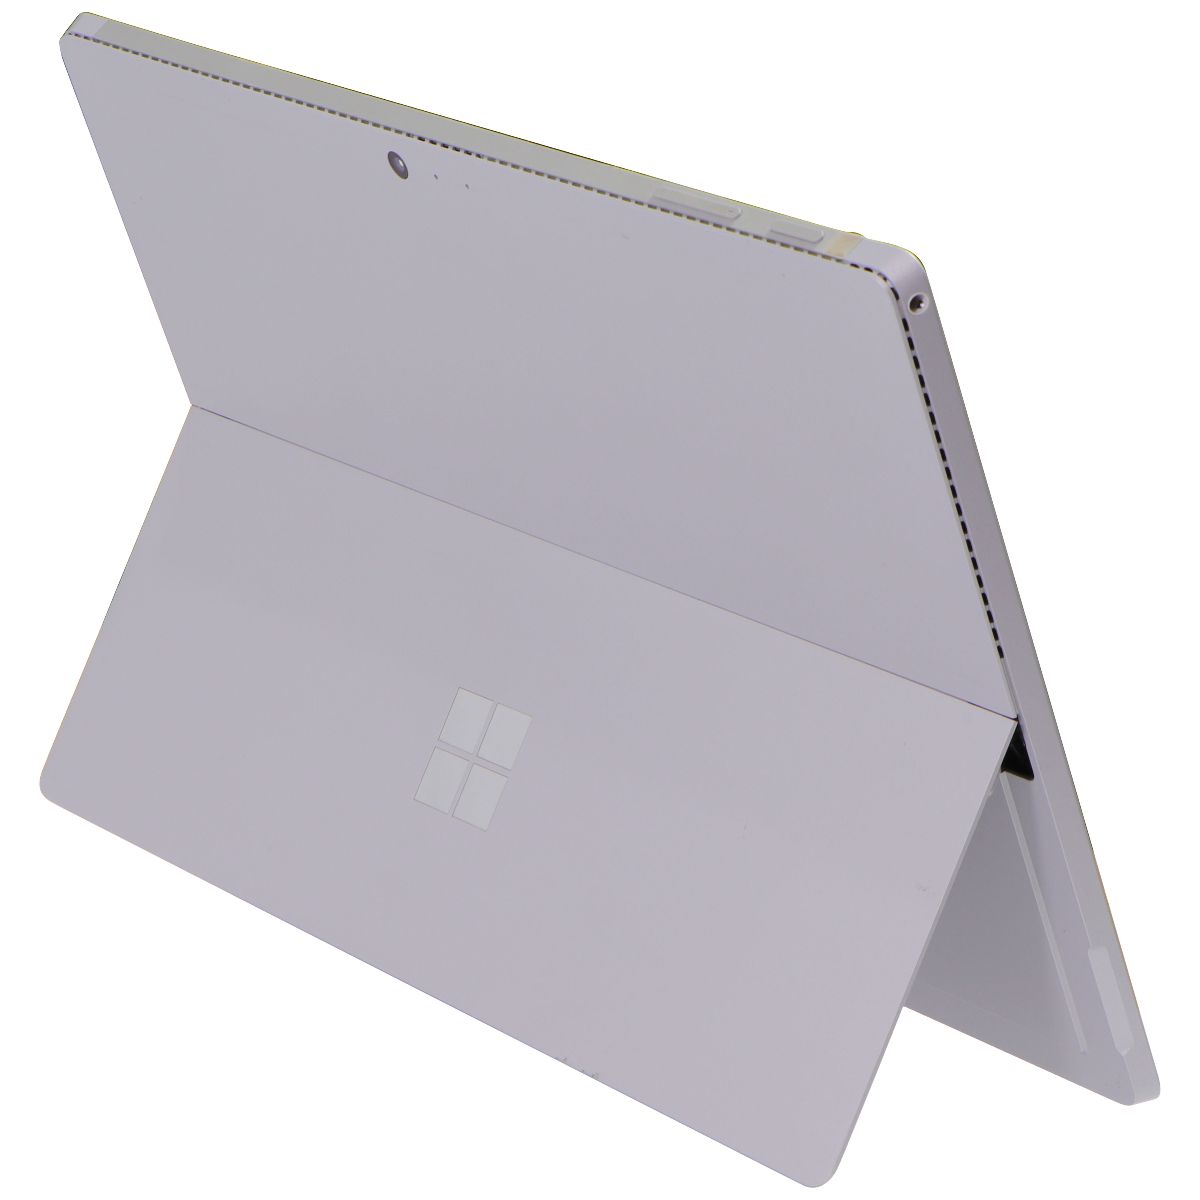 Microsoft Surface Pro 4 (12.3-in) Tablet 1724 m3-6Y30/256GB/4GB/10 Pro - Silver Laptops - PC Laptops & Netbooks Microsoft    - Simple Cell Bulk Wholesale Pricing - USA Seller